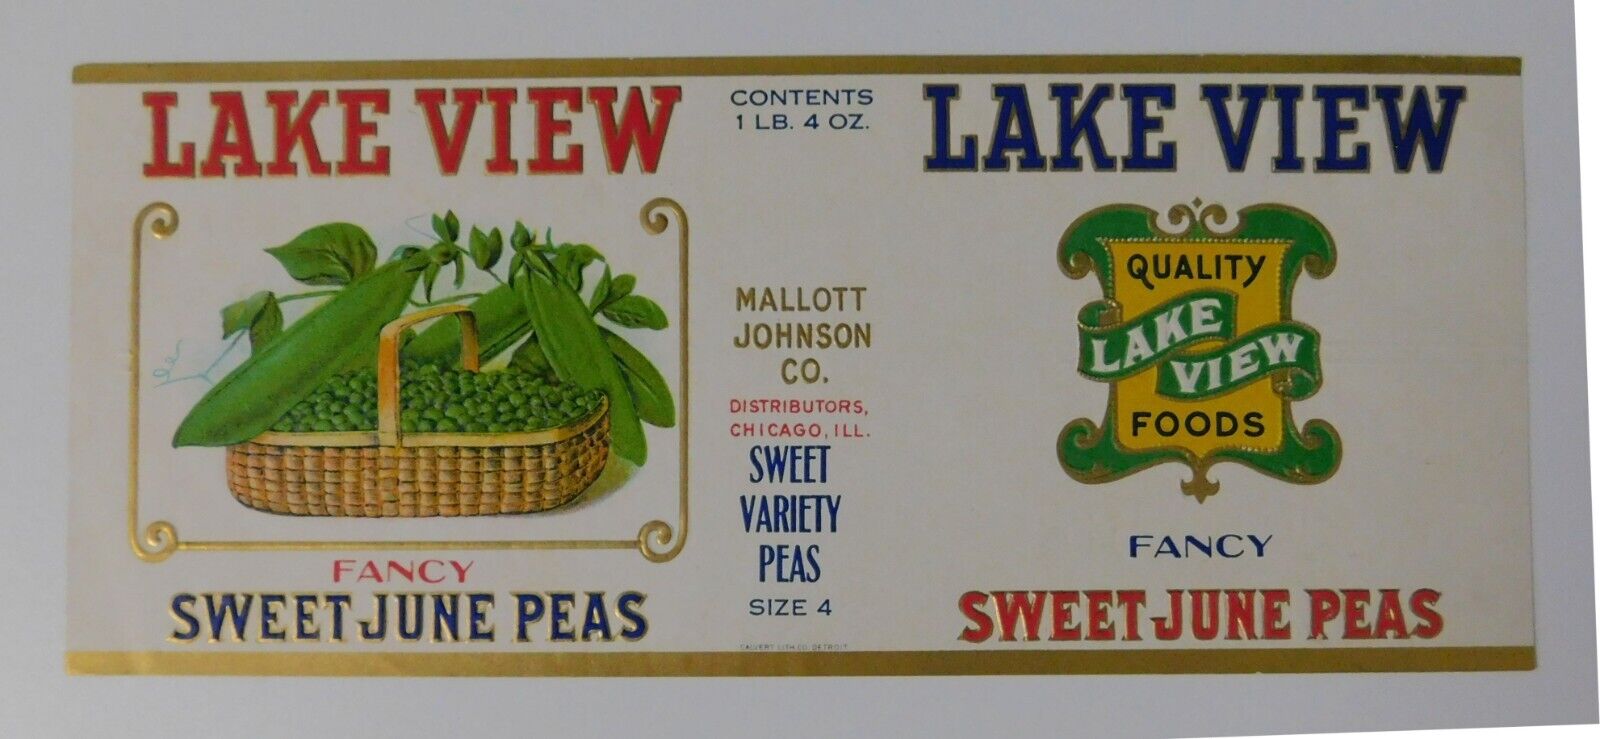 Vintage  Lake View Sweet June Peas  Can label, Chicago